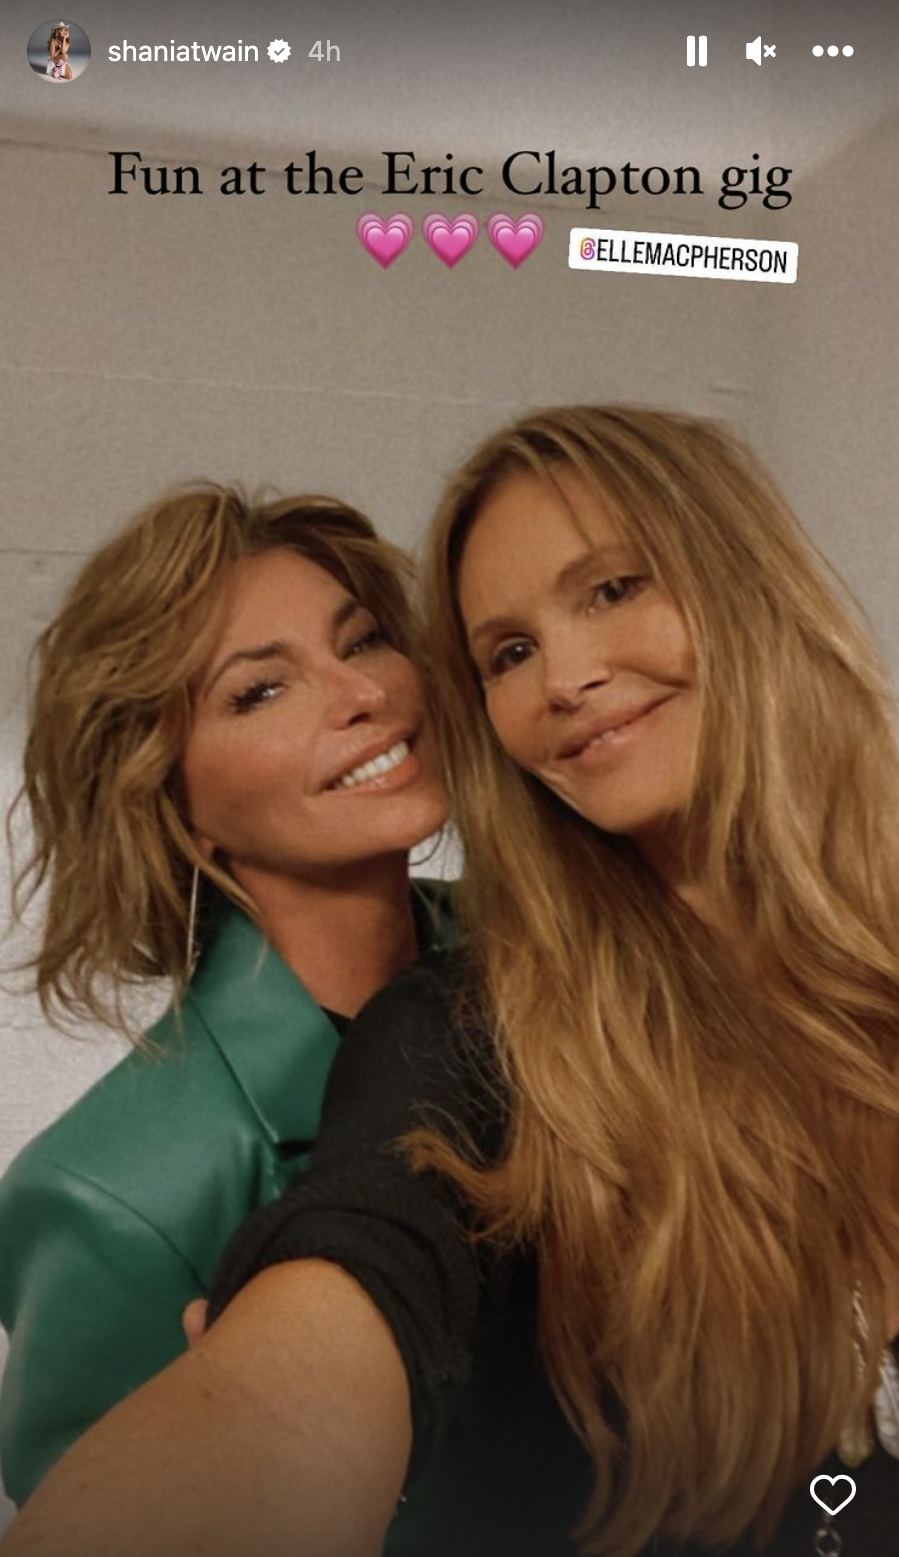 Shania Twain and Elle Macpherson attended Eric Clapton's concert in Zurich on Oct. 14. (Photo via @shaniatwain on Instagram)